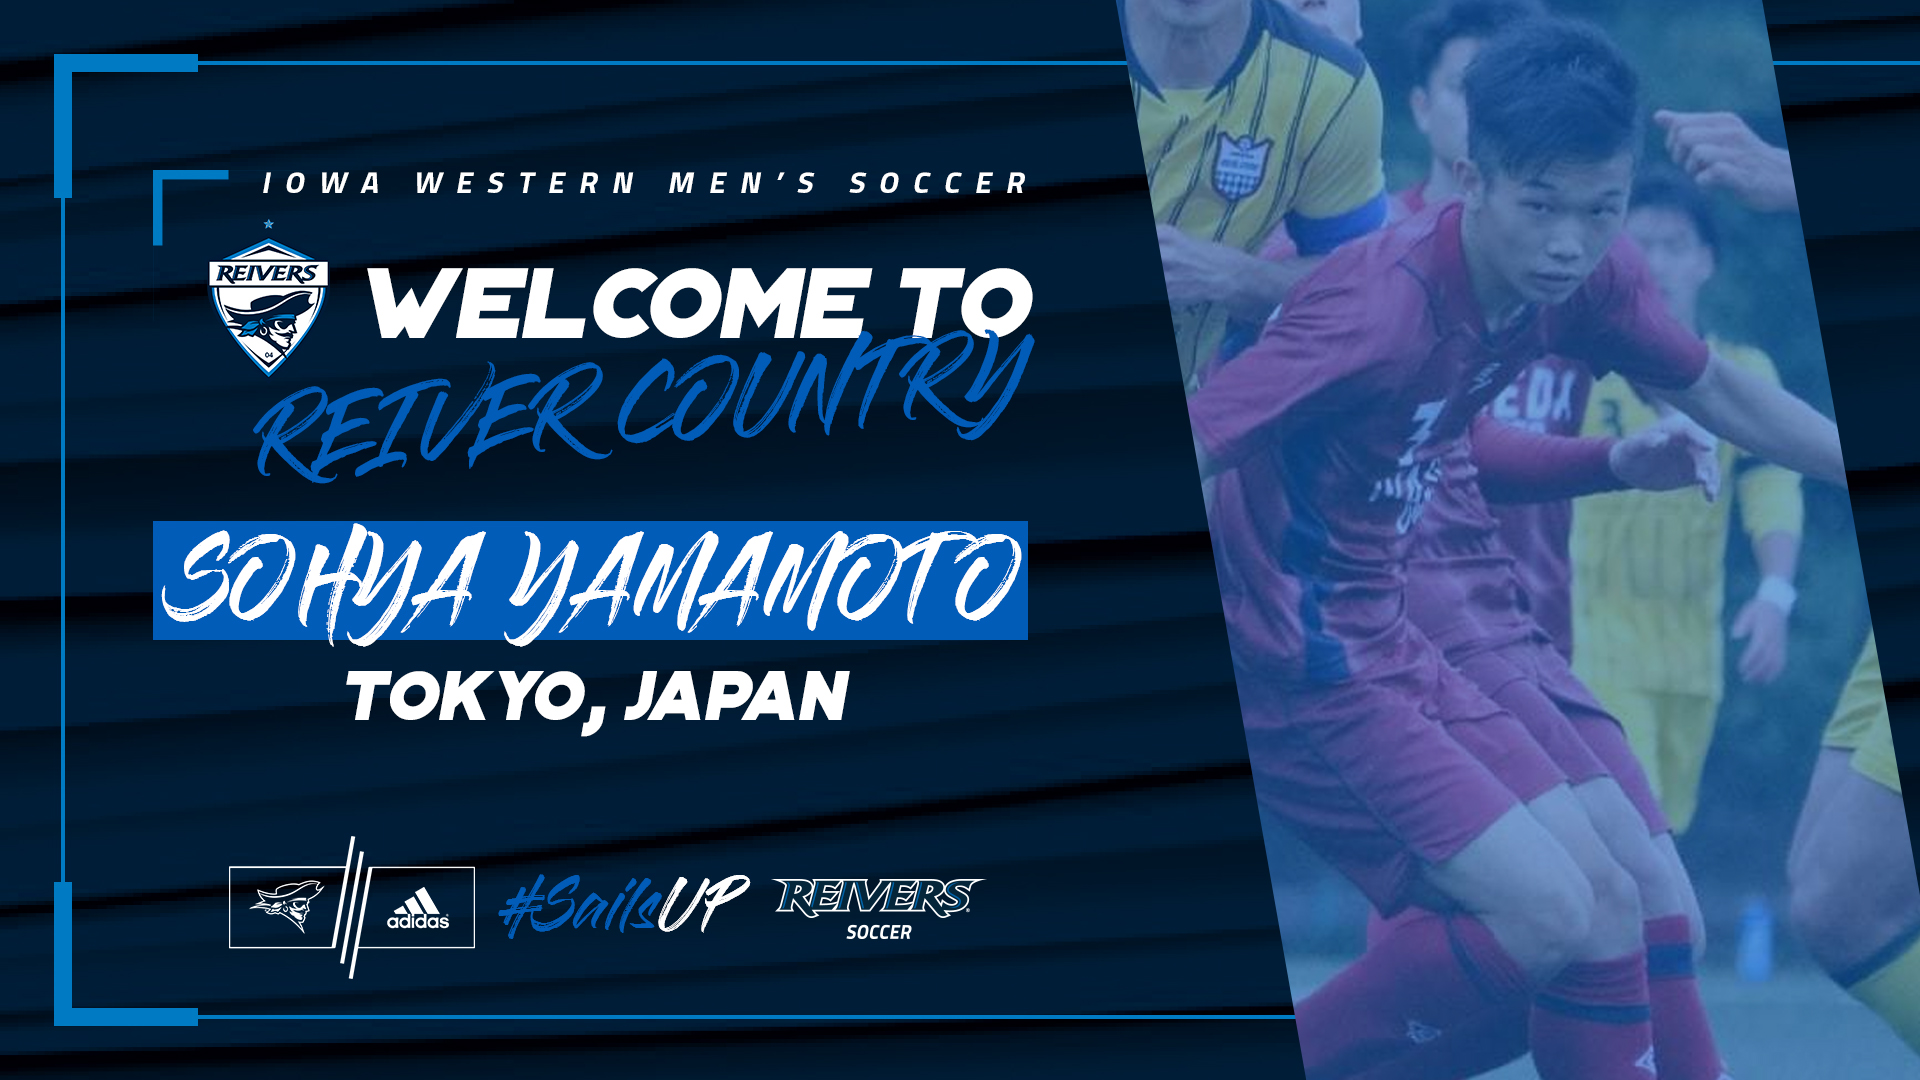 Sohya Yamamoto commits to the Reiver's soccer team